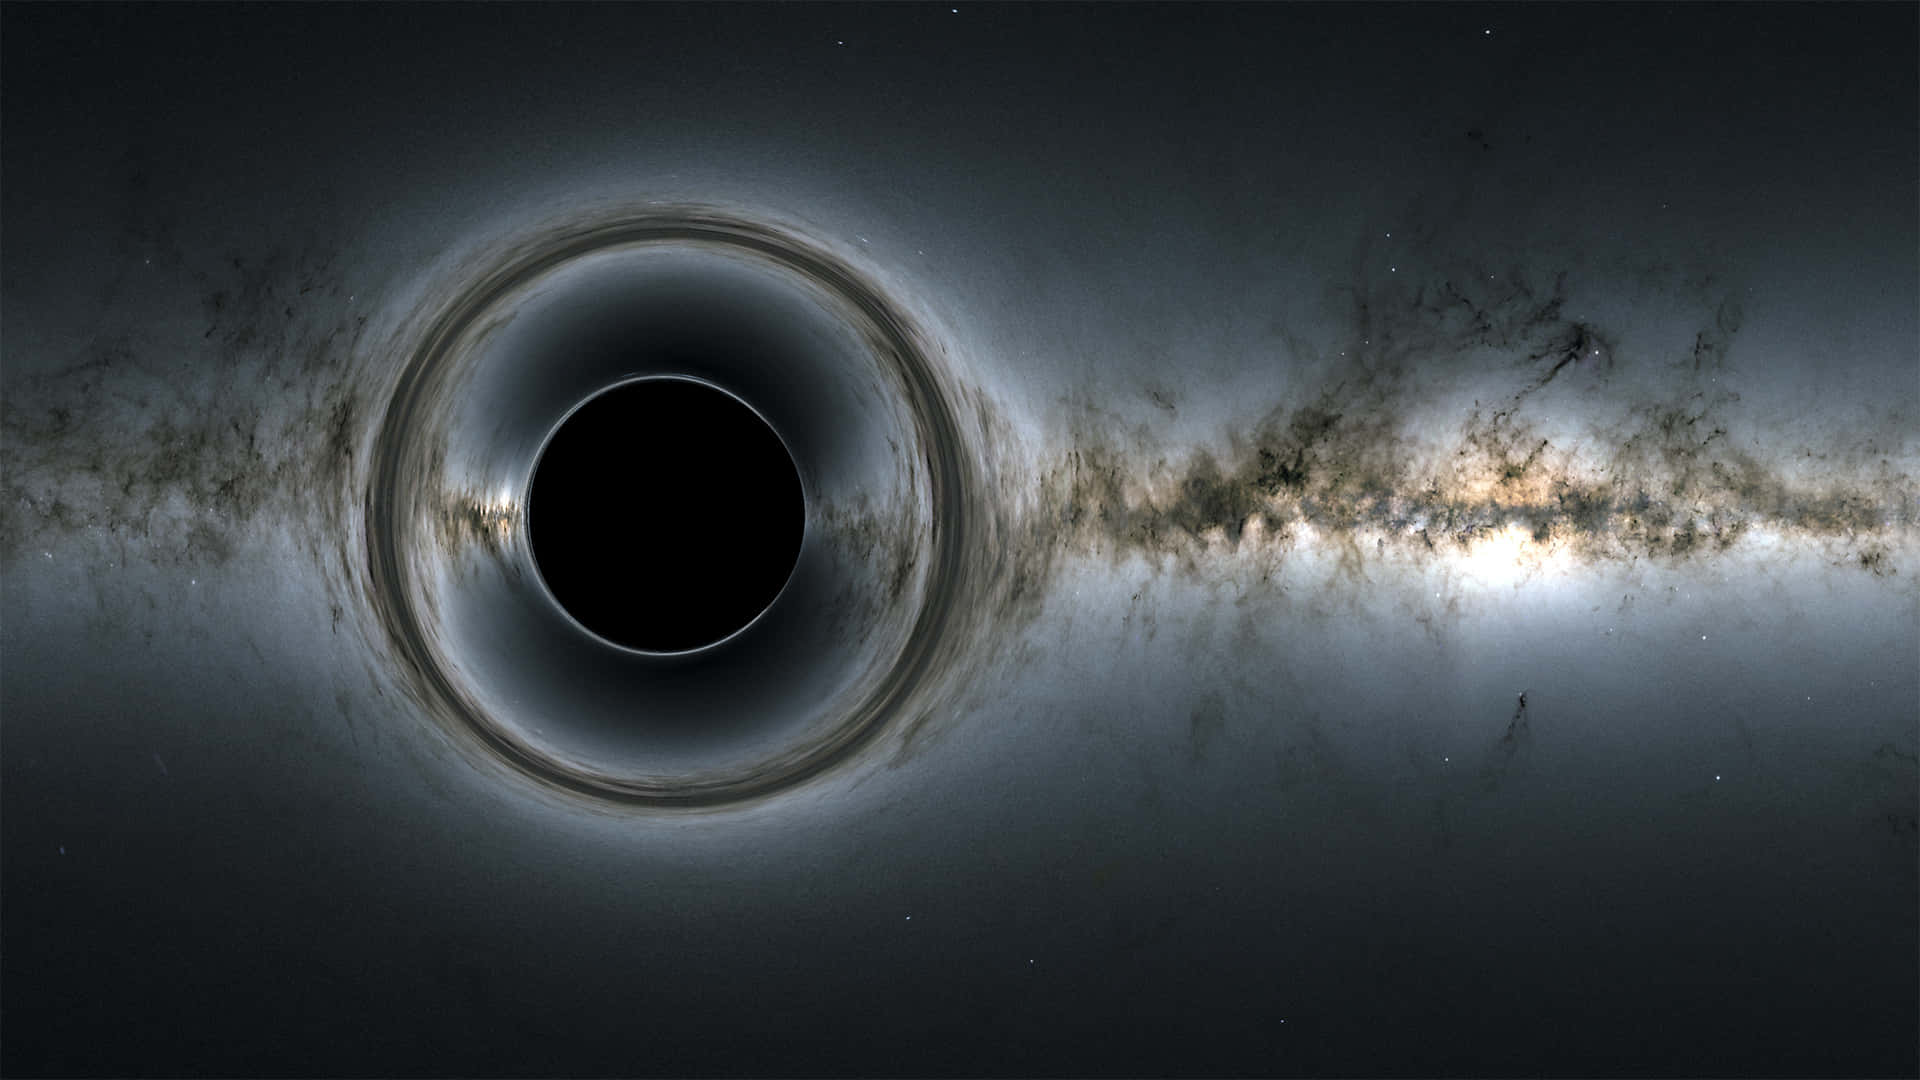 A Black Hole Captured By The Hubble Telescope